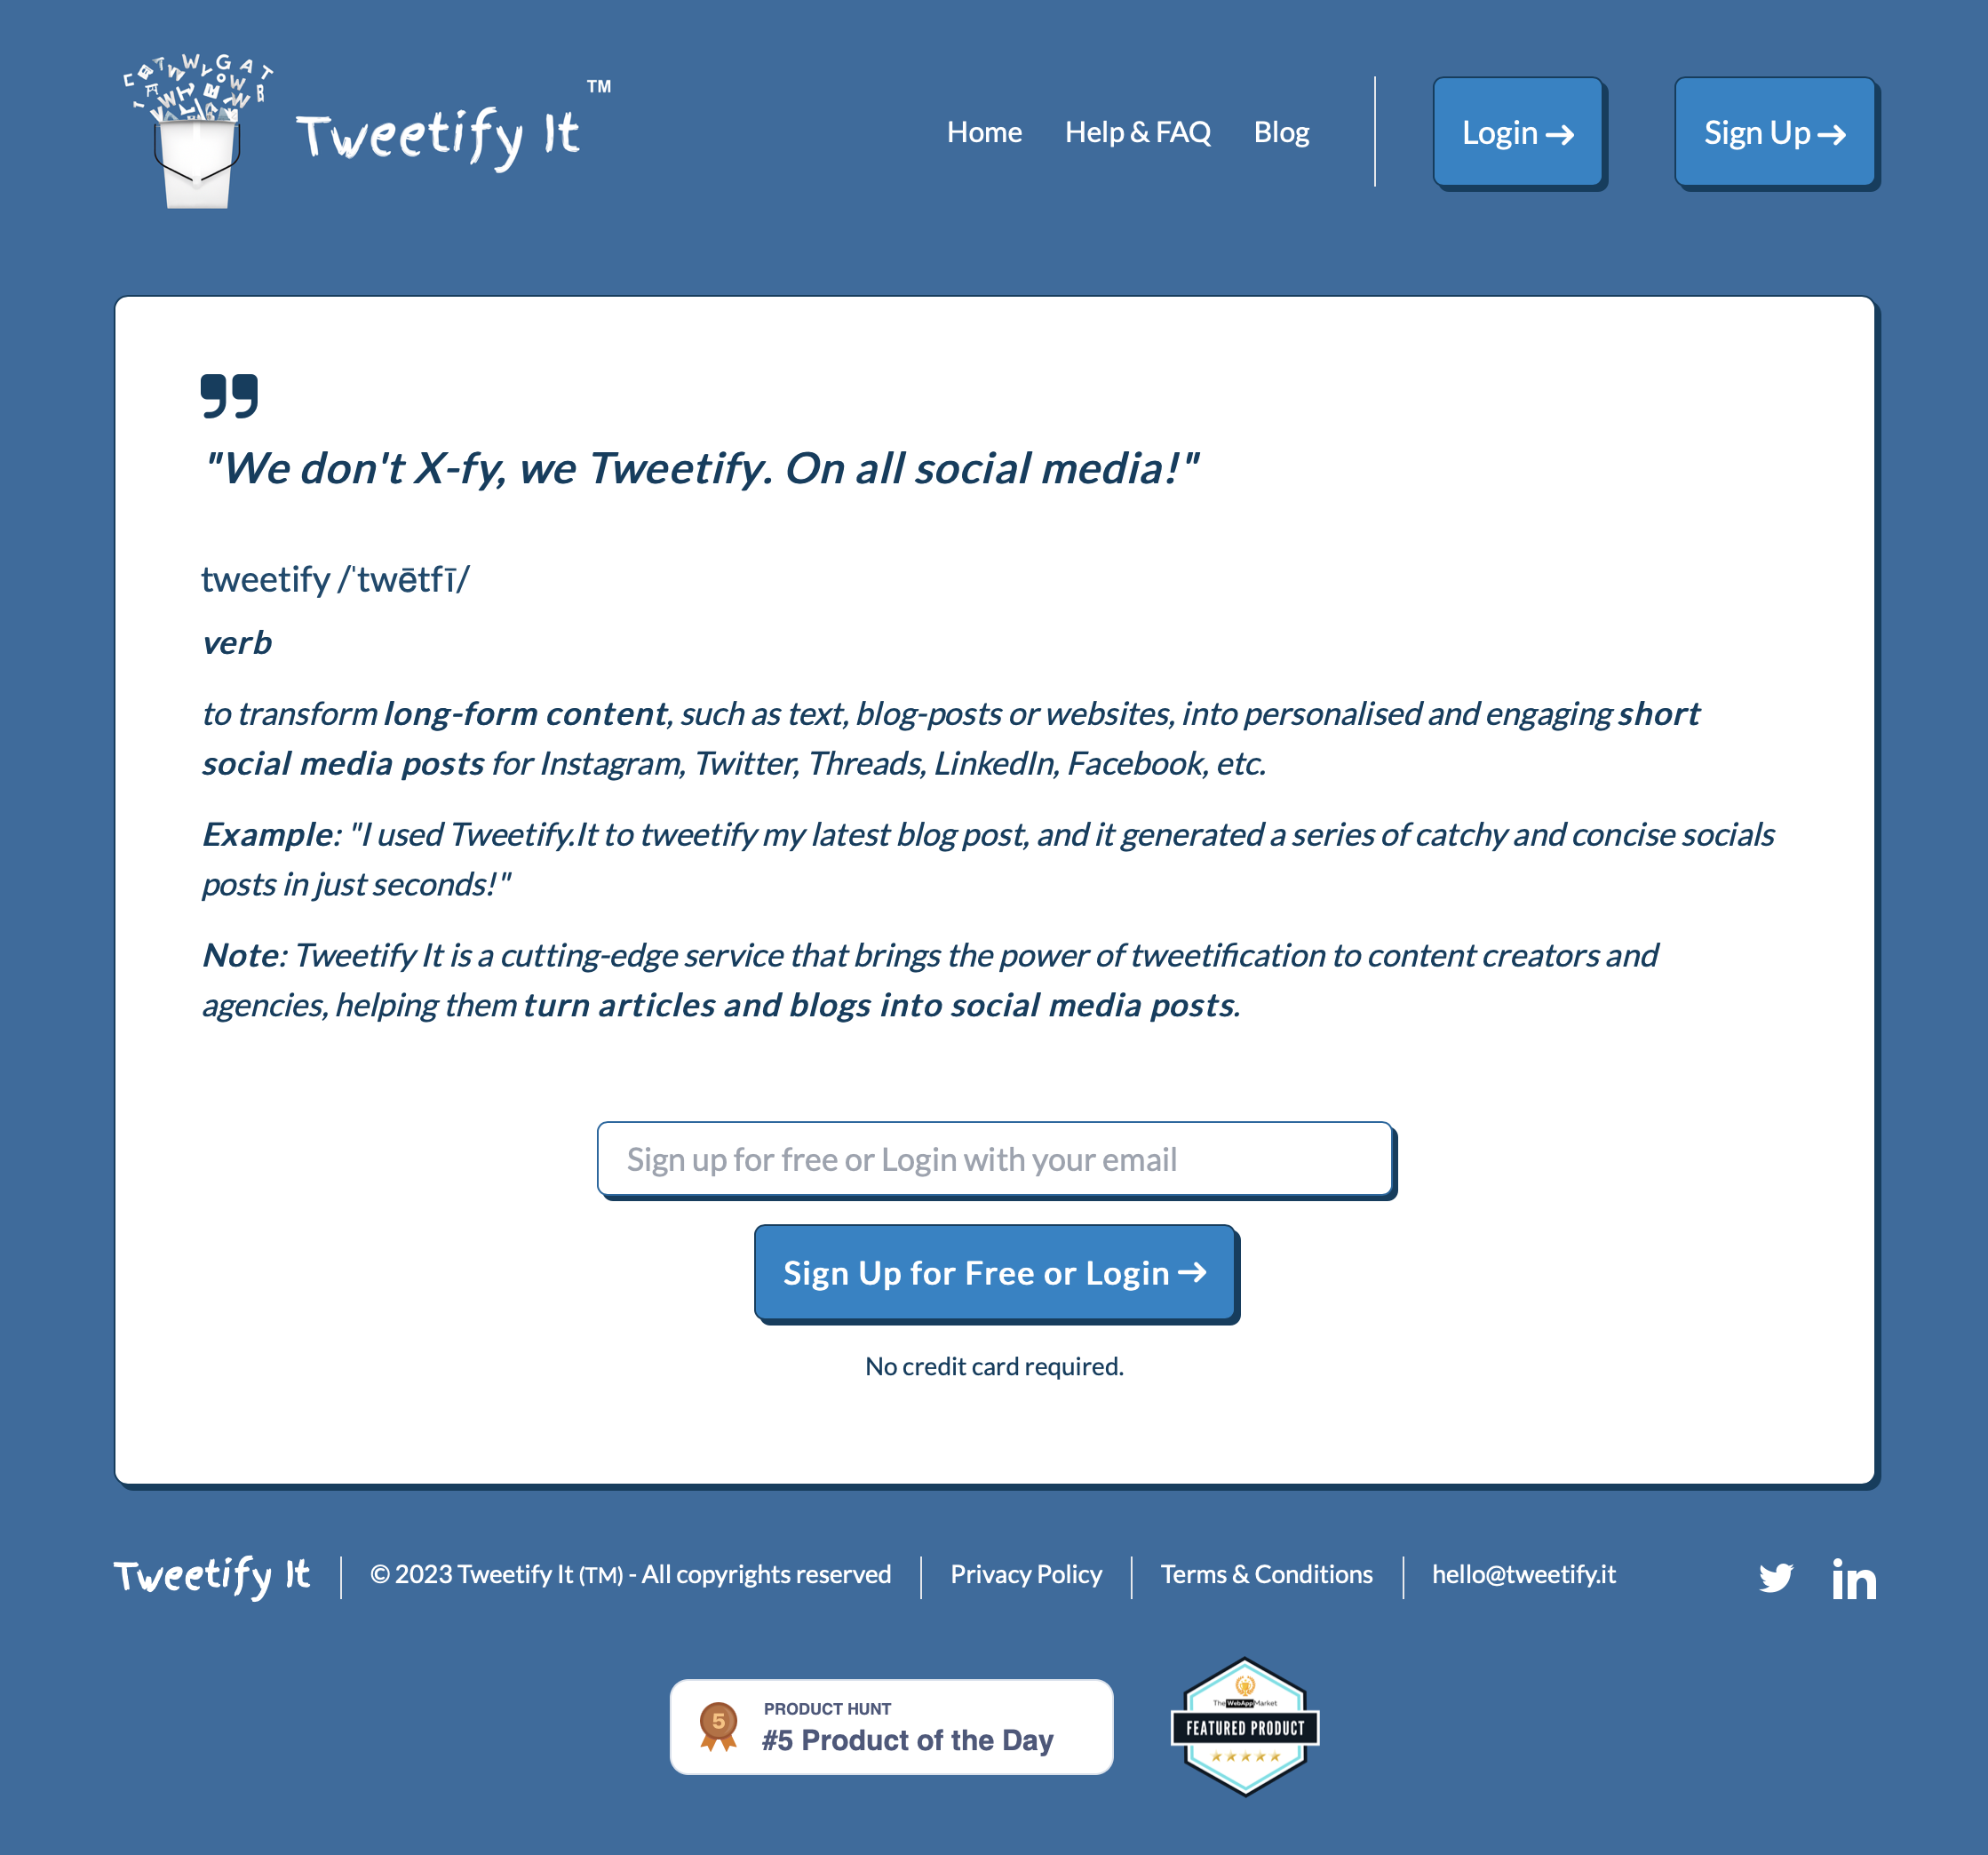 startuptile Tweetify It-Turn articles and blogs into personal social media posts!